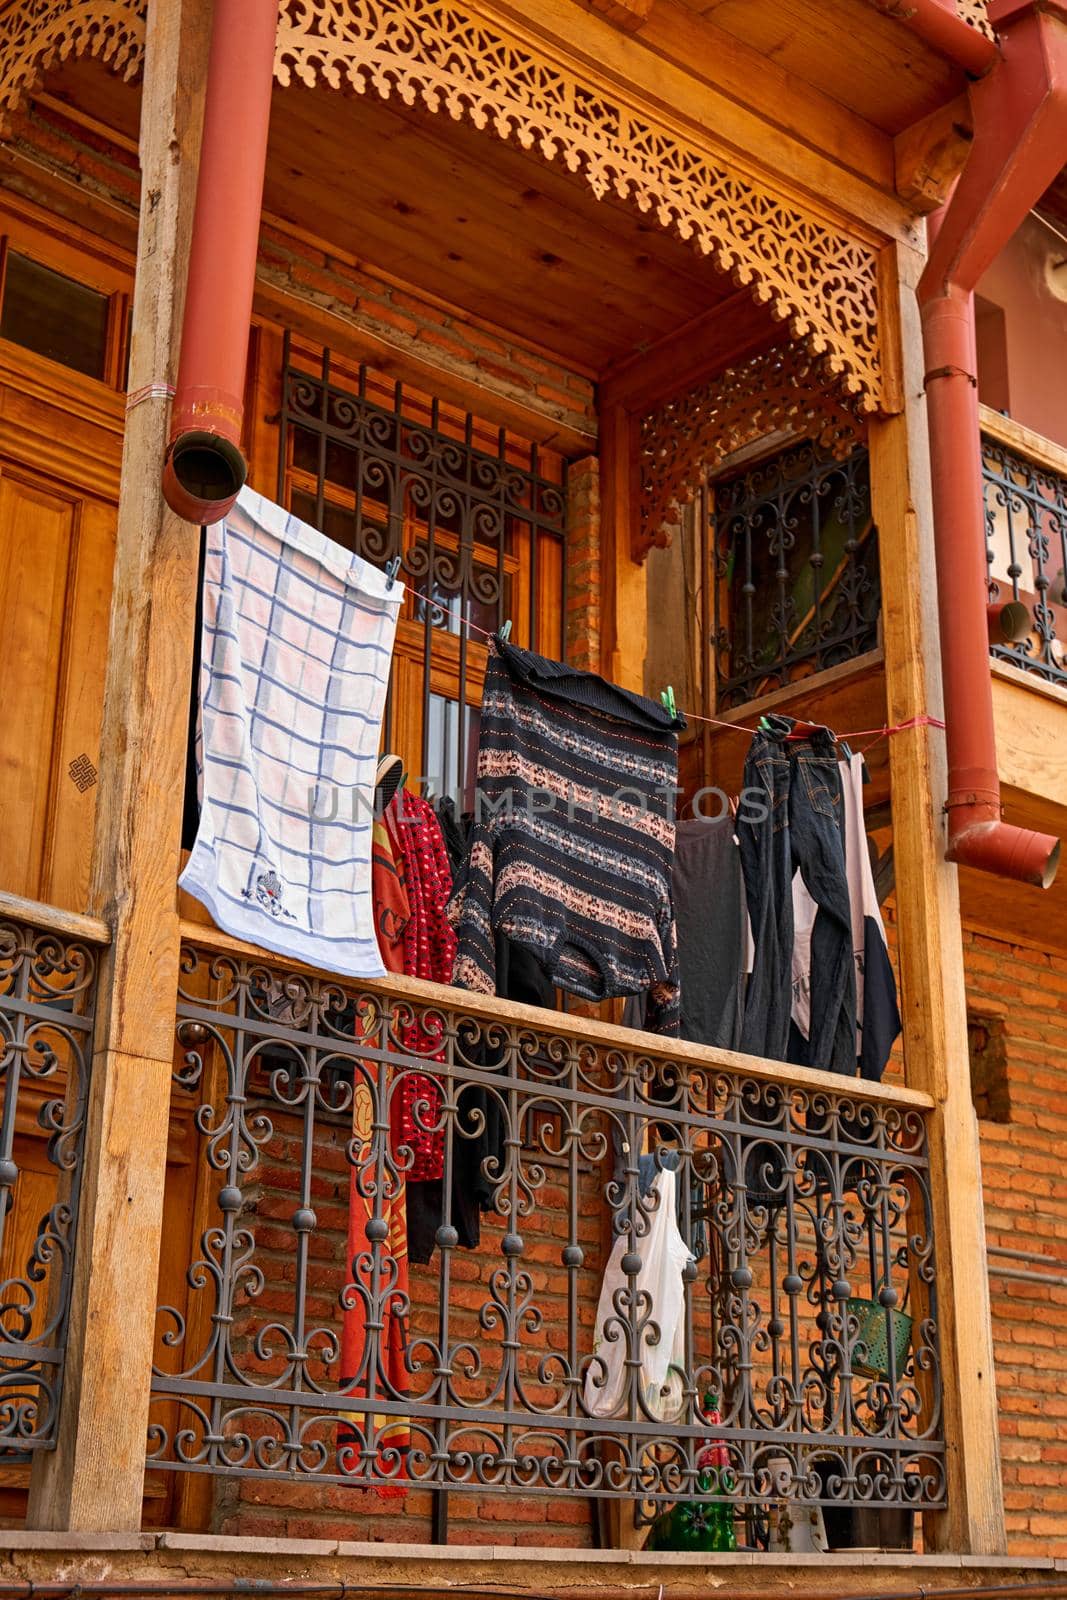 Household traditions in Georgia. The washed laundry is dried on the balcony outside.